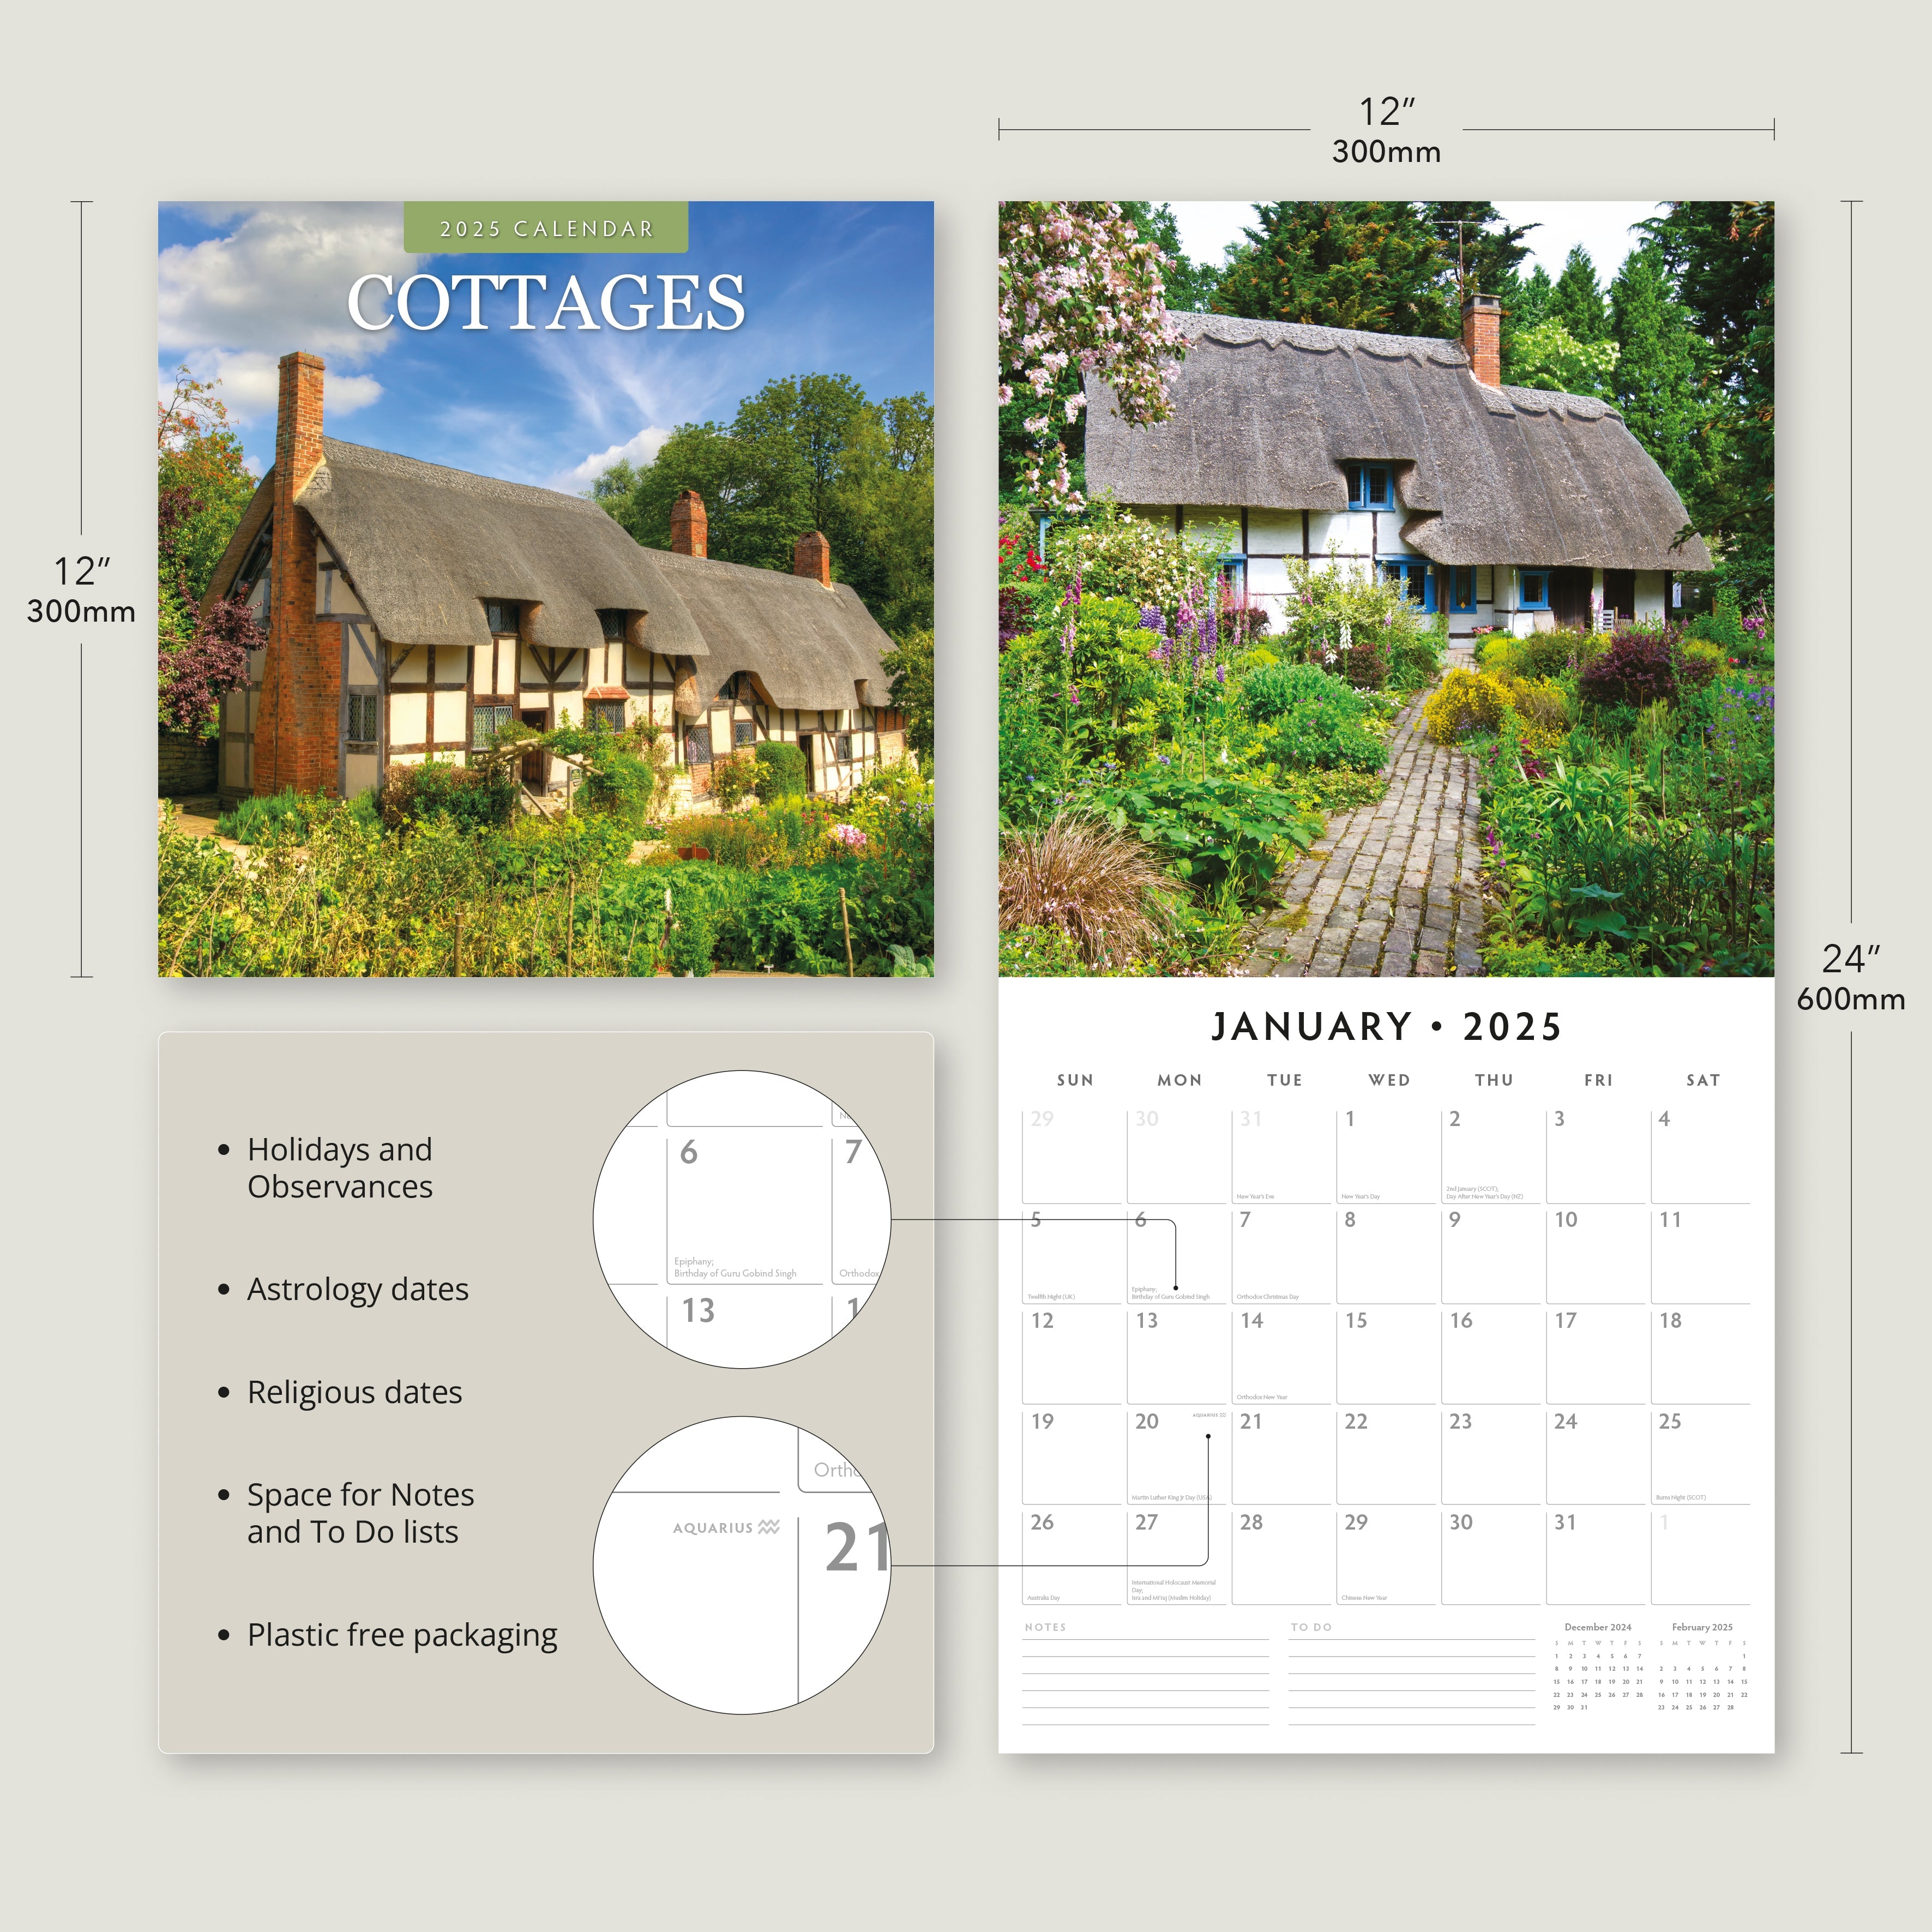 2025 Cottages - Square Wall Calendar